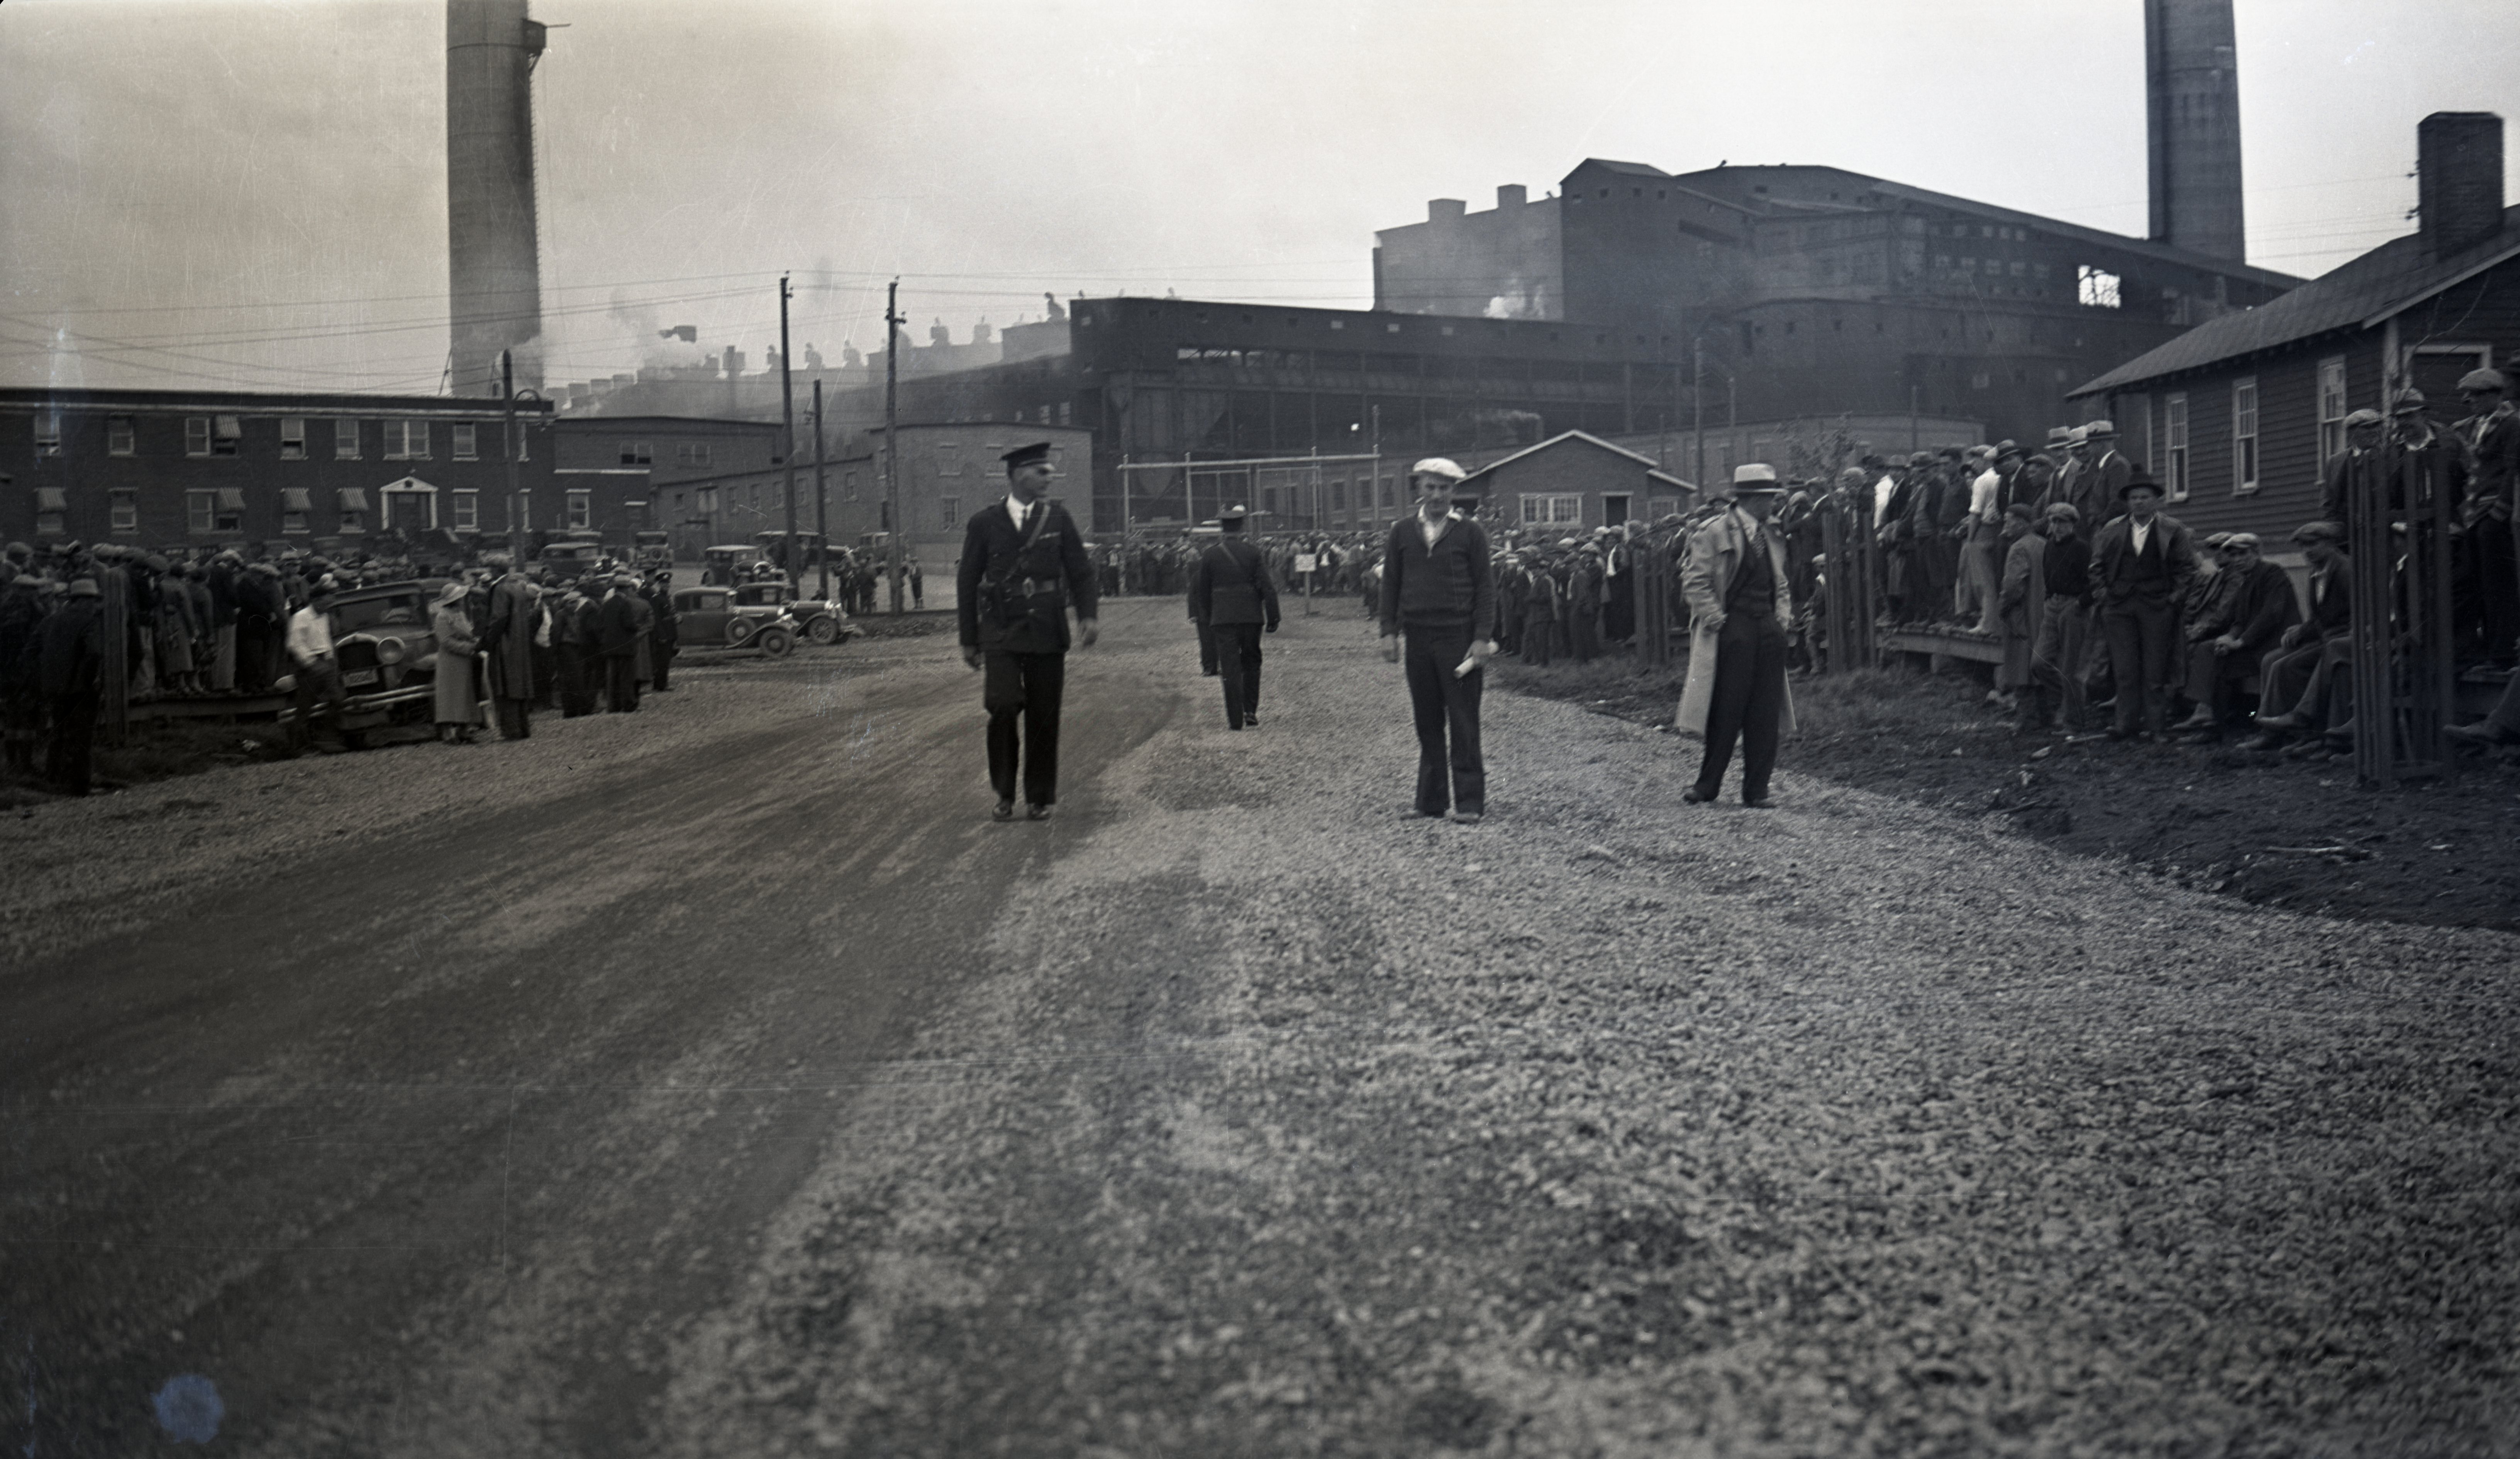 Black-and-white photograph of a road with people on opposite sides and five police officers in the middle, two of whom are wearing uniforms. You can see the smelter in the background.